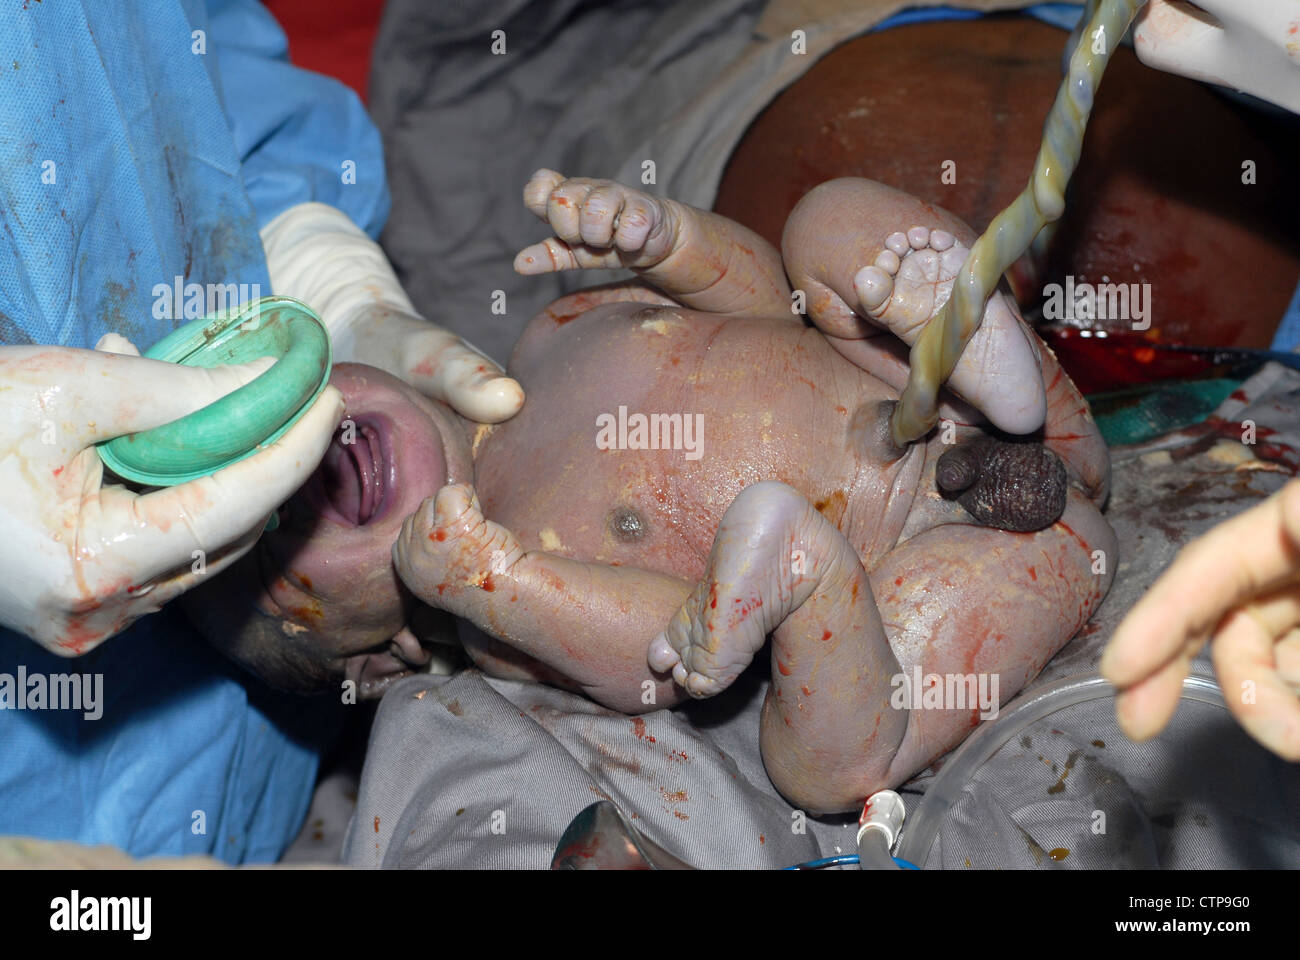 Infant delivered by Caesarean section. Stock Photo